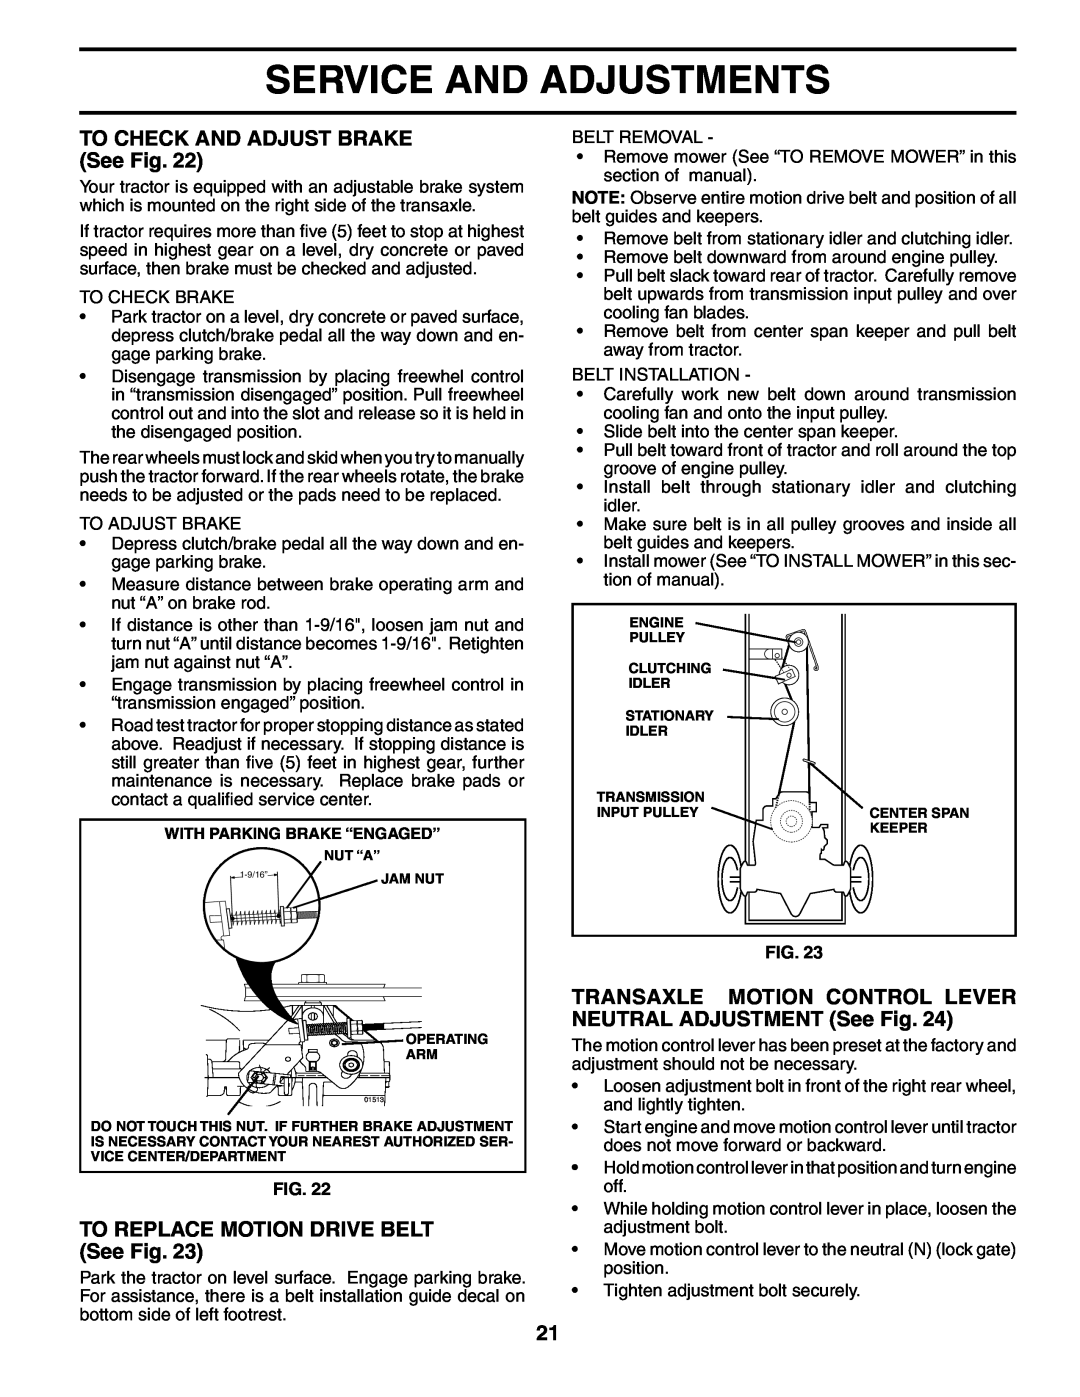 Poulan 187301 manual TO CHECK AND ADJUST BRAKE See Fig, TO REPLACE MOTION DRIVE BELT See Fig, Service And Adjustments 